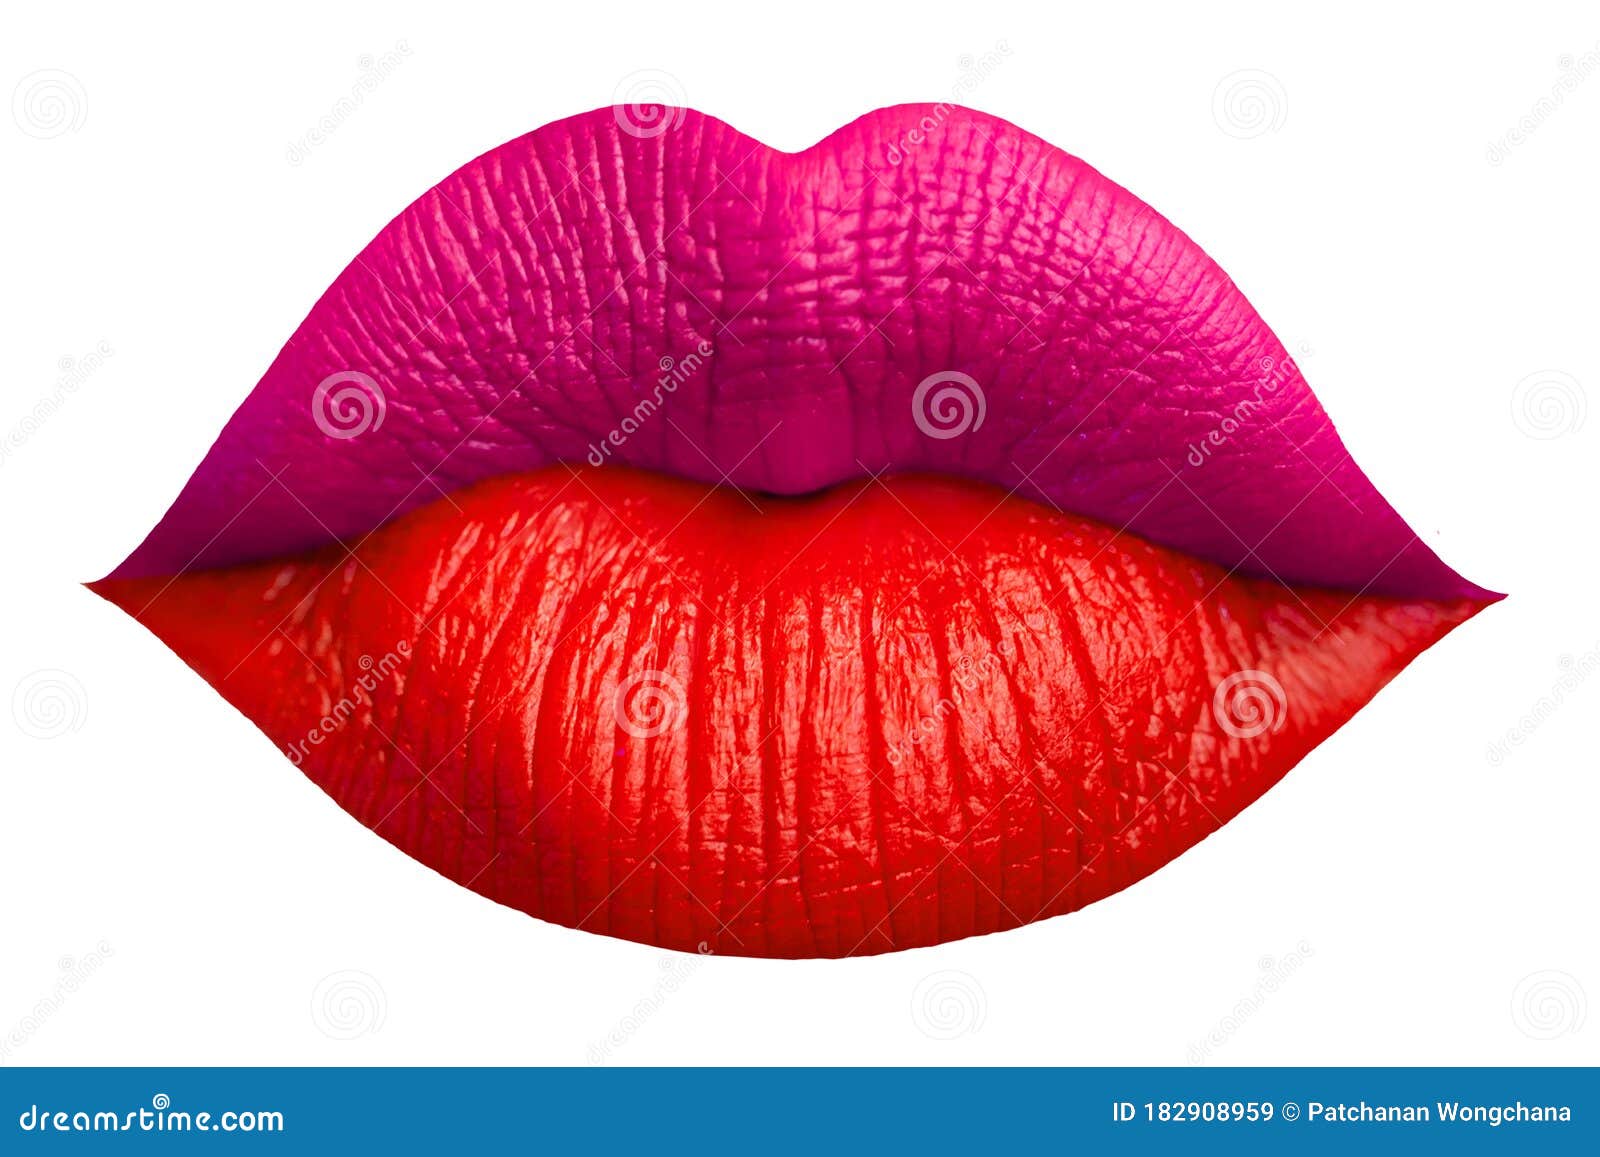 åbning Adskillelse offer Woman`s Lip .the Lip Prints of Color Different Women on a White  Background,Kiss Lips, Girl Mouth Stock Illustration - Illustration of  isolated, background: 182908959